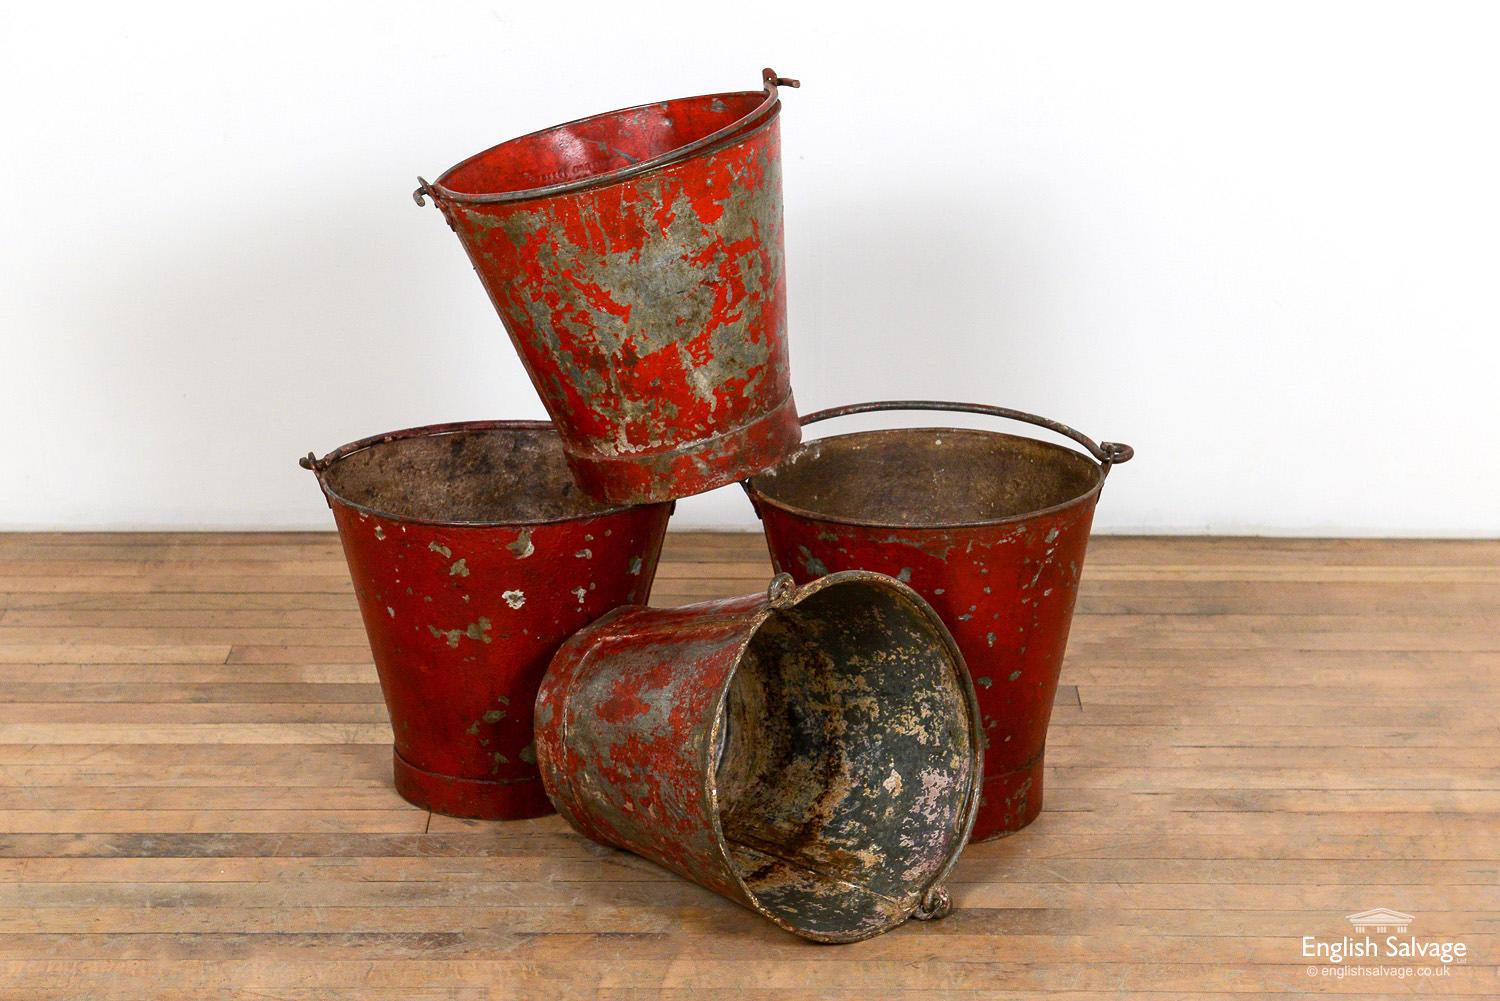 Salvaged red galvanised fire buckets. Approximate size of each below, height doesn't include the 20cm high handle. Chips, knocks and scratches as expected with past use.